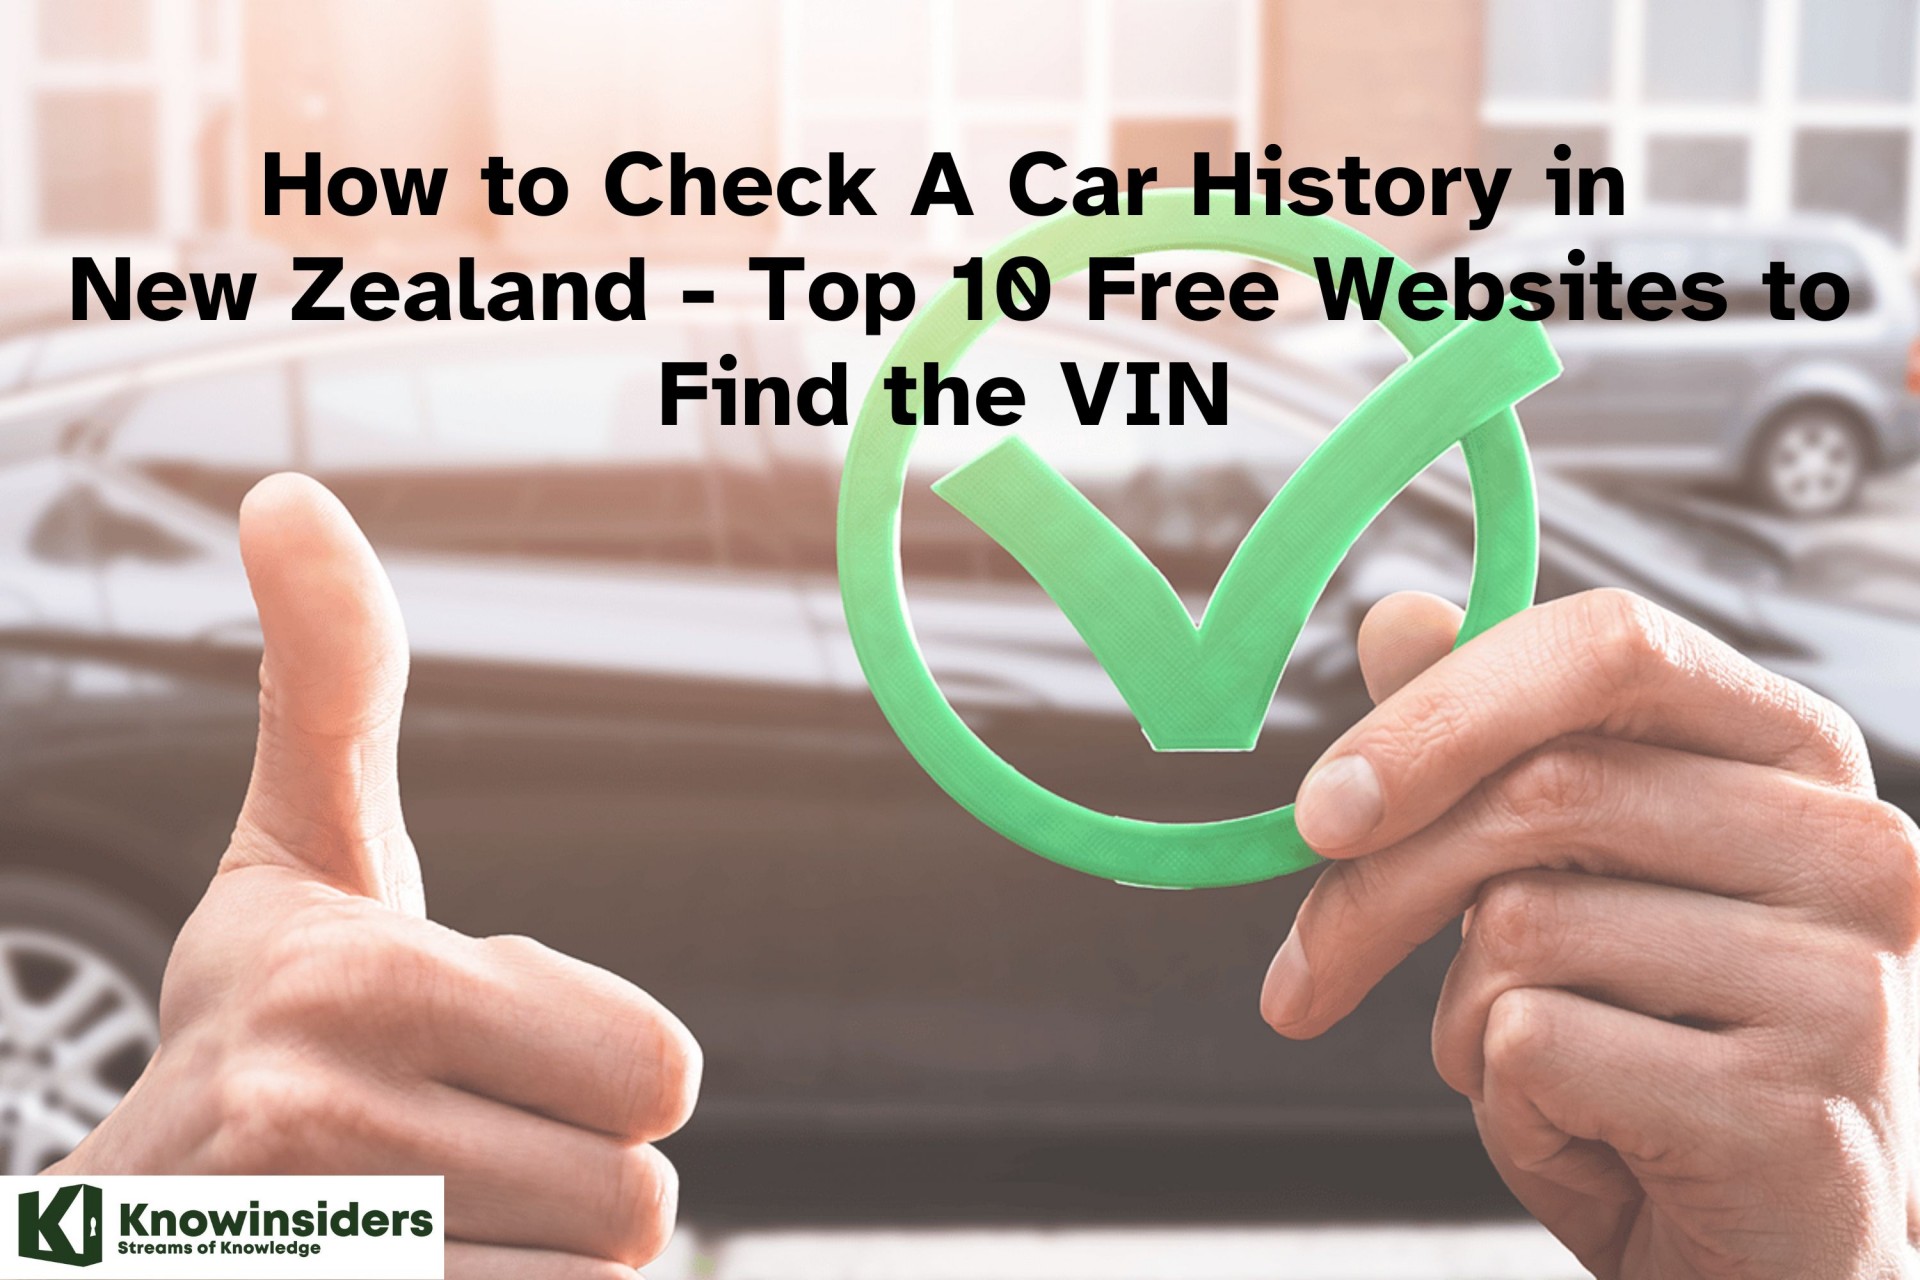 How to Check A Car History in New Zealand - Top 10 Free Websites to Find the VIN